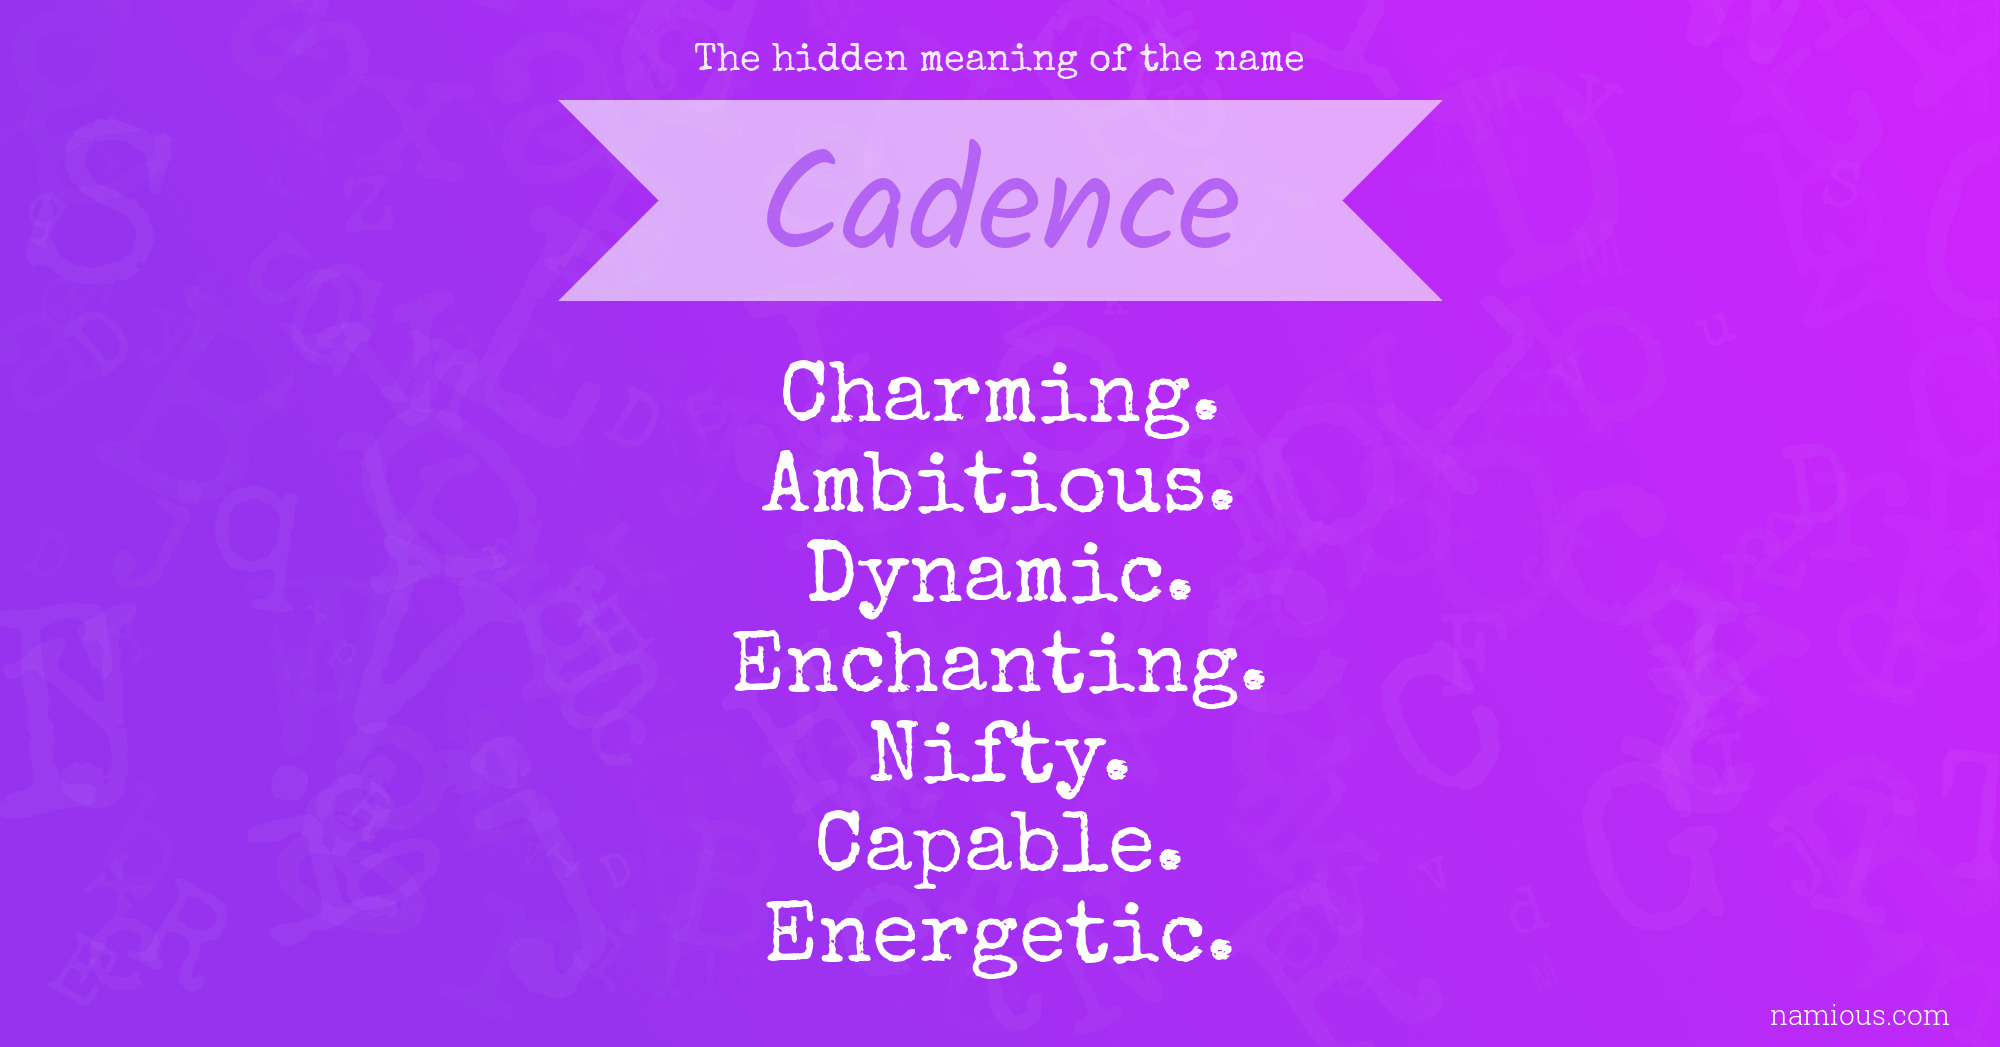 The hidden meaning of the name Cadence